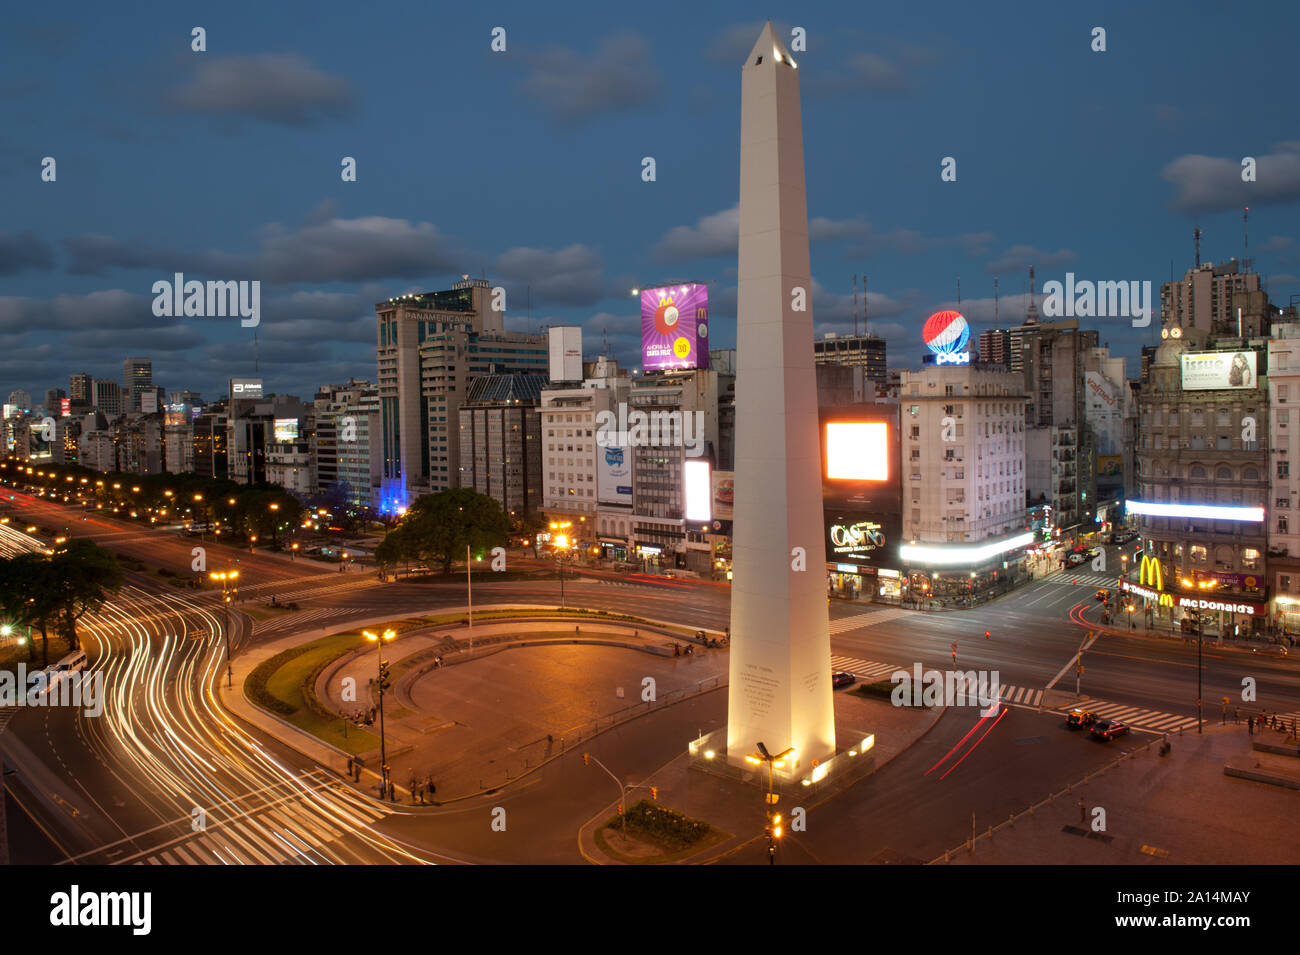 Buenos Aires, Argentina - November 12 2012: After the rush hour and traffic on the sreets of Buenos Aires city by night. This photo shows the downtown Stock Photo